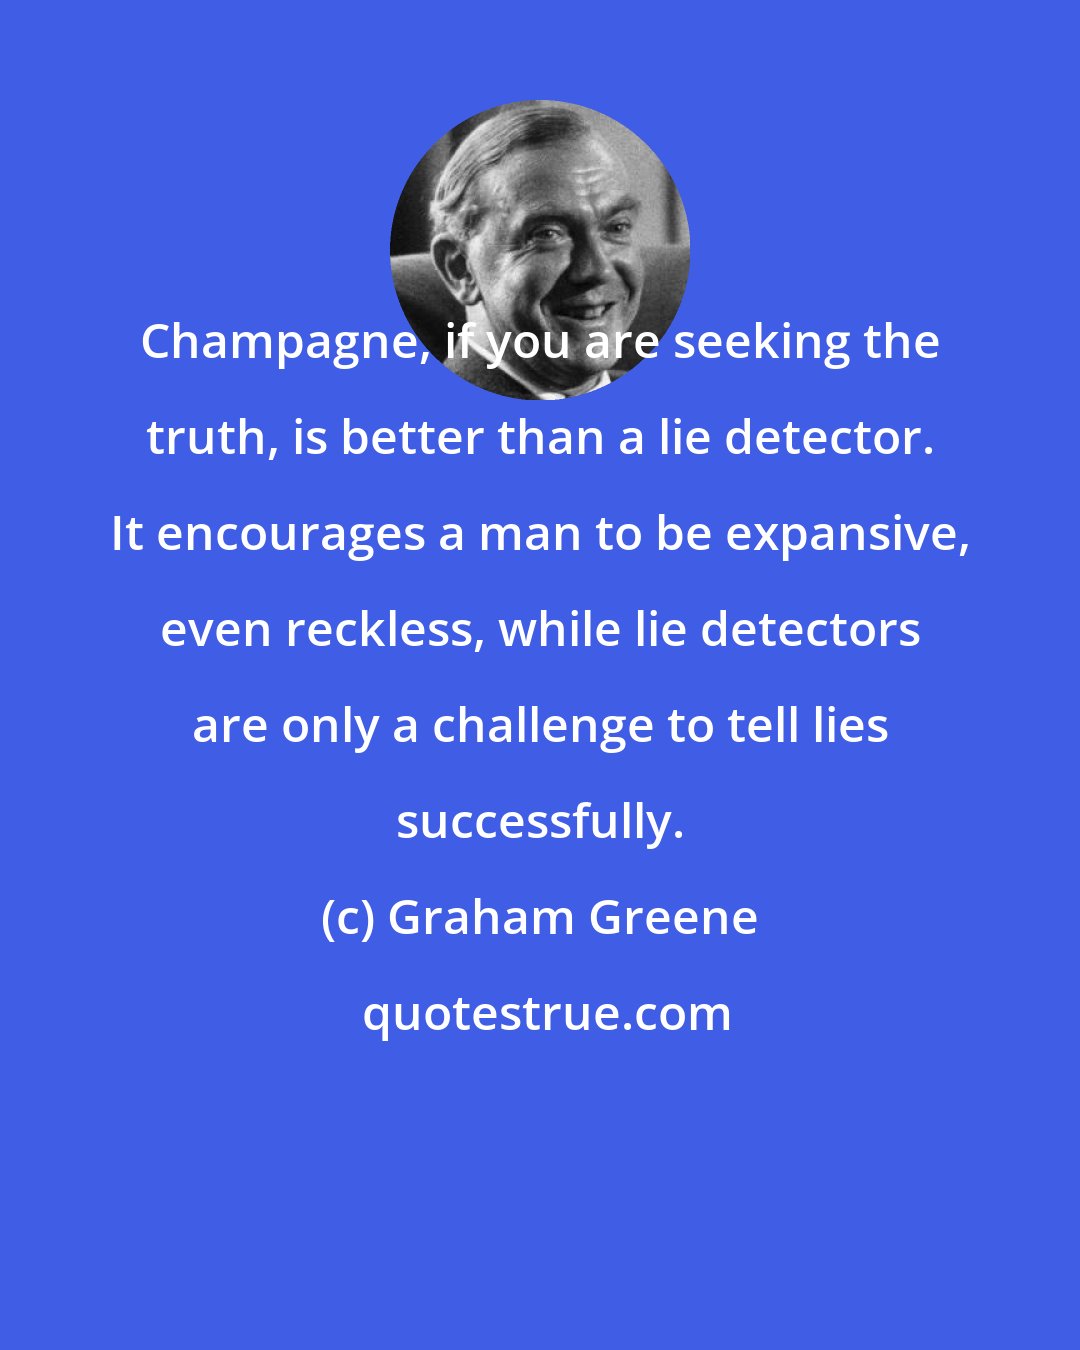 Graham Greene: Champagne, if you are seeking the truth, is better than a lie detector. It encourages a man to be expansive, even reckless, while lie detectors are only a challenge to tell lies successfully.